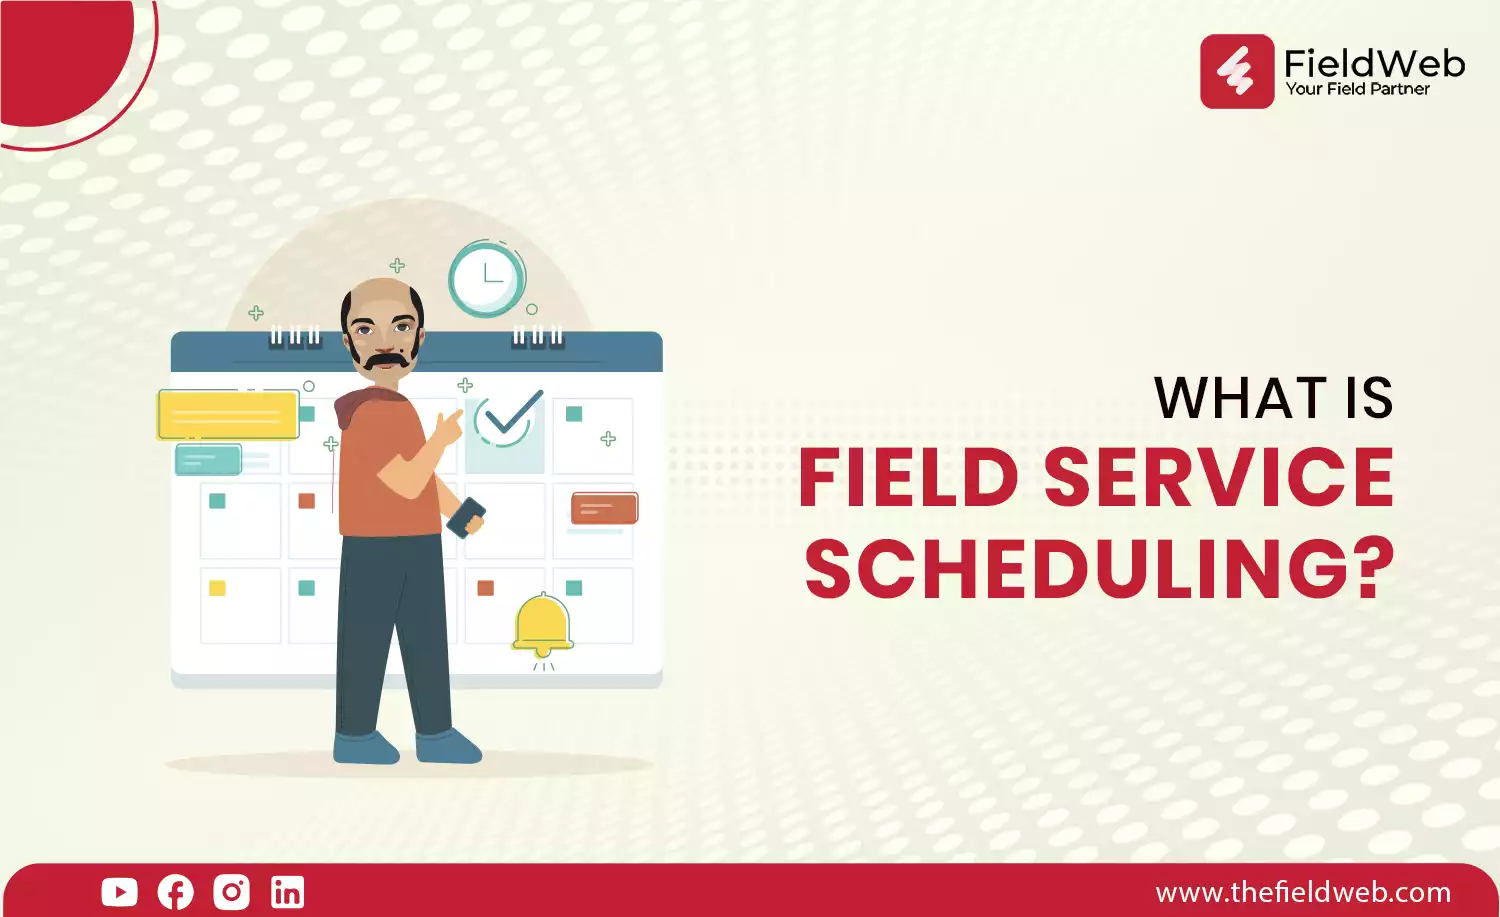 image is displaying about field service scheduling, the technicians working in background